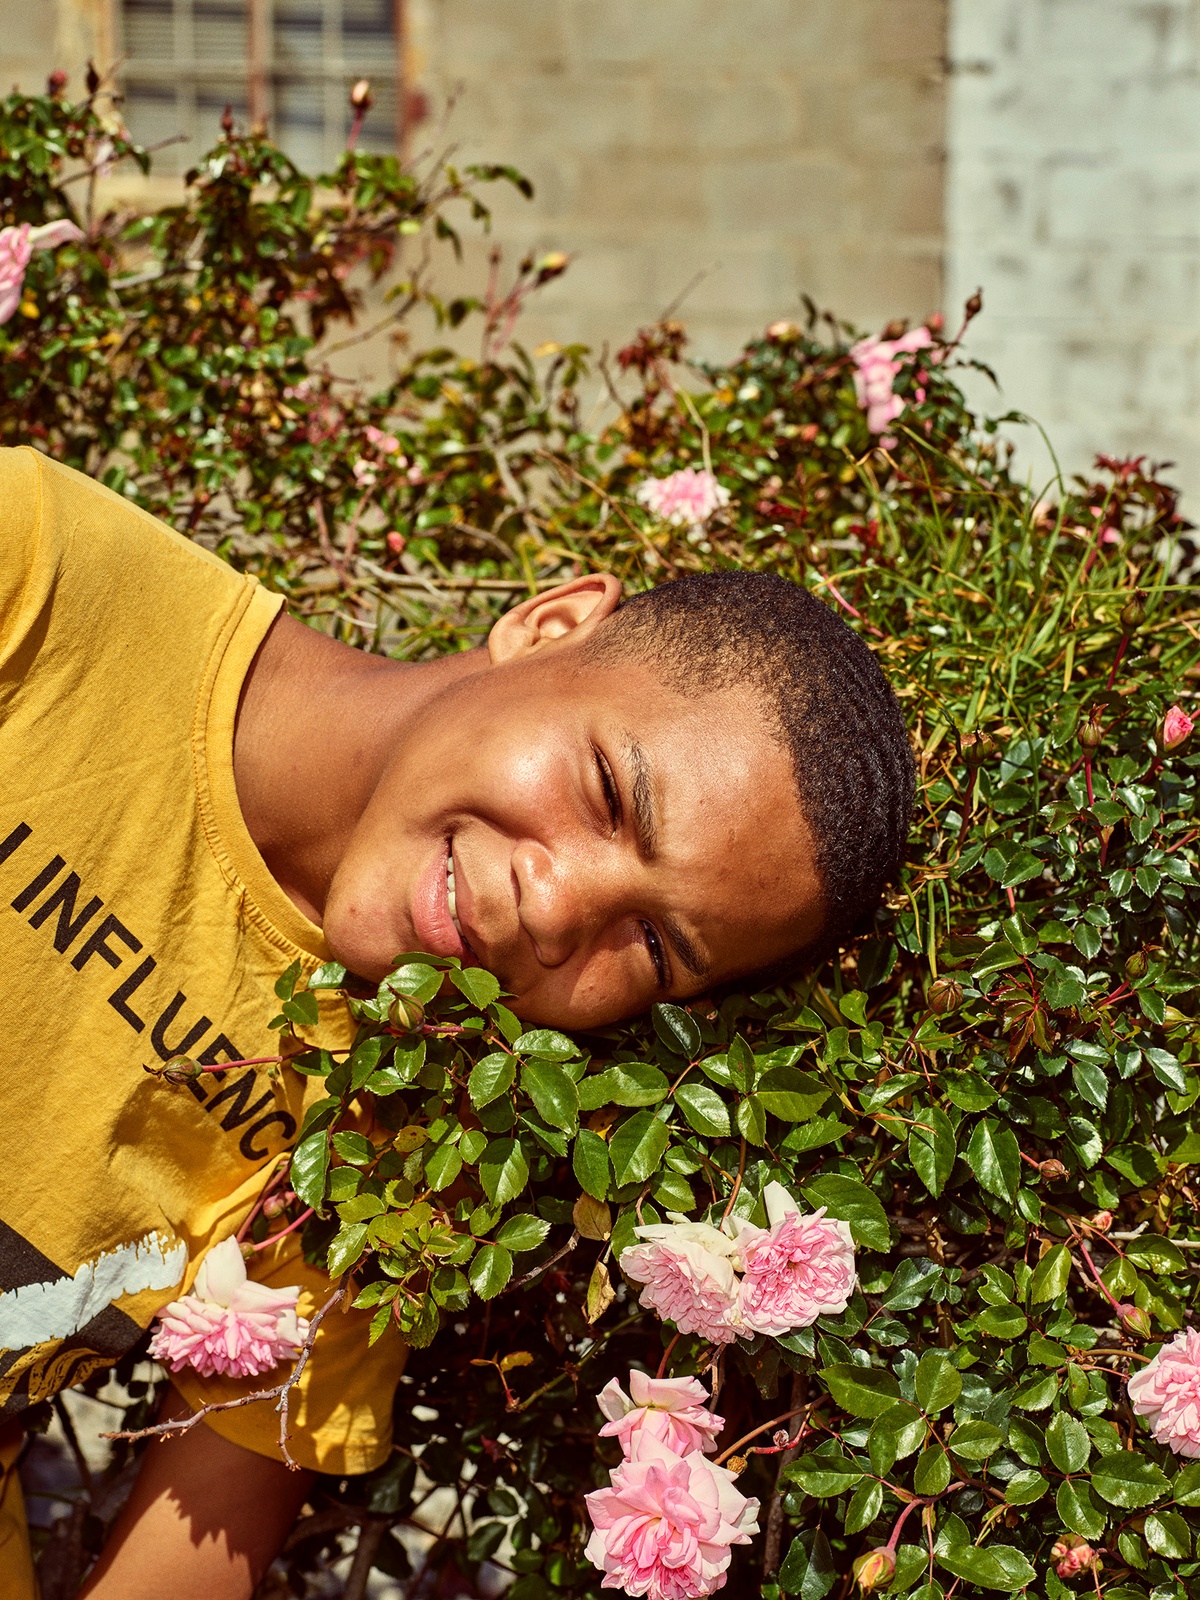 Photograph by Pieter Hugo, from A4’s ‘Atlantis Project’ exchange with the SWAGG United Dance Crew, that depicts a young person with their head rested on top of a flower bush.
